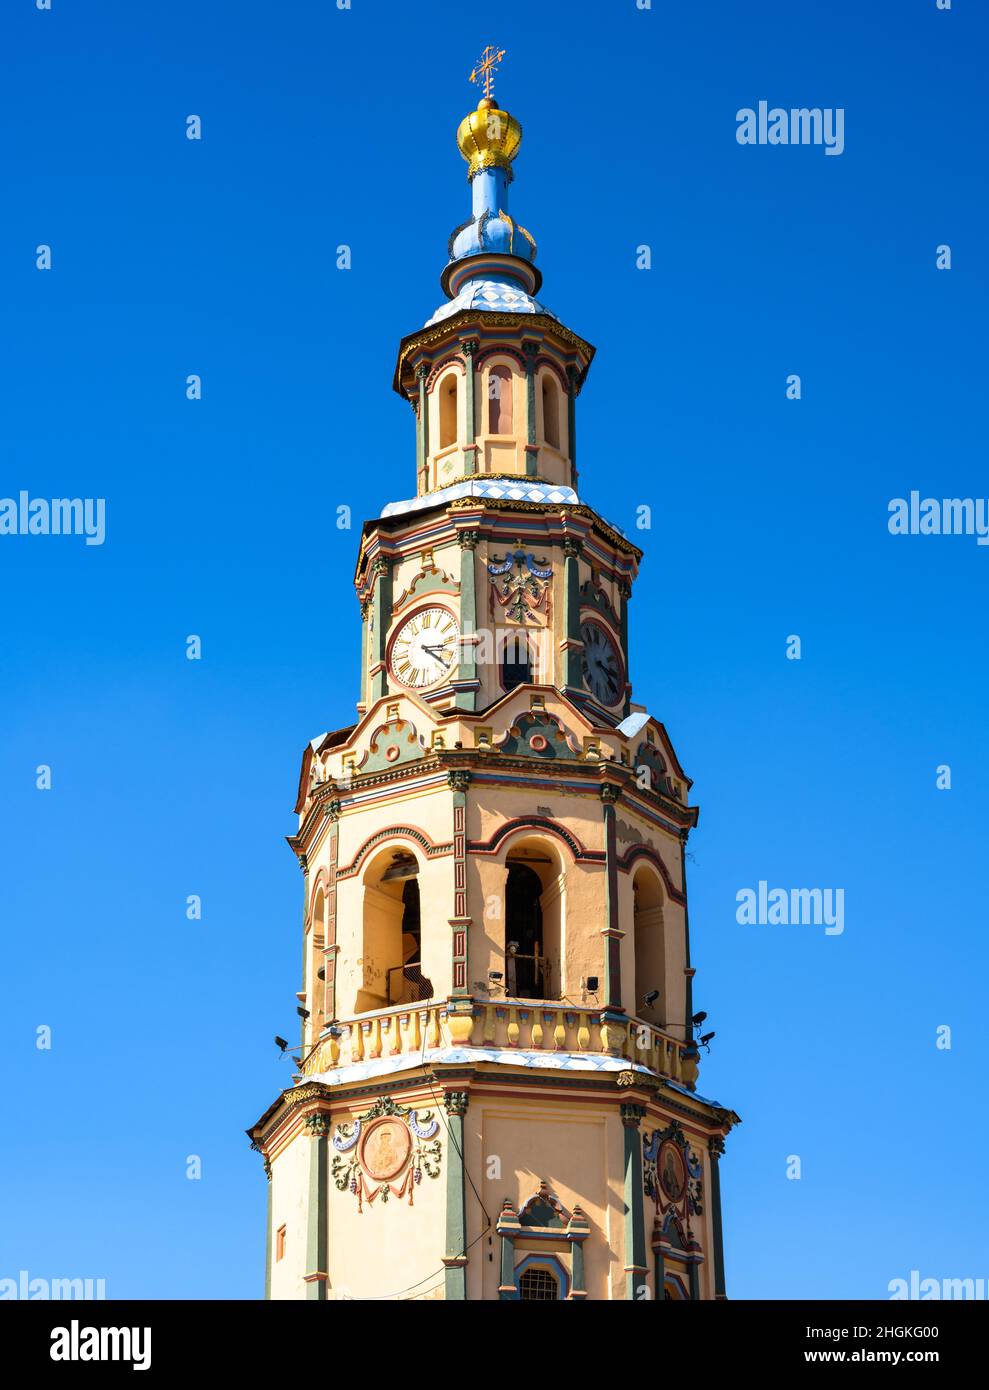 Cathedral of Saints Peter and Paul, luxury bell tower, Kazan, Tatarstan, Russia. It is tourist attraction of Kazan. Ornate Russian Orthodox church, be Stock Photo